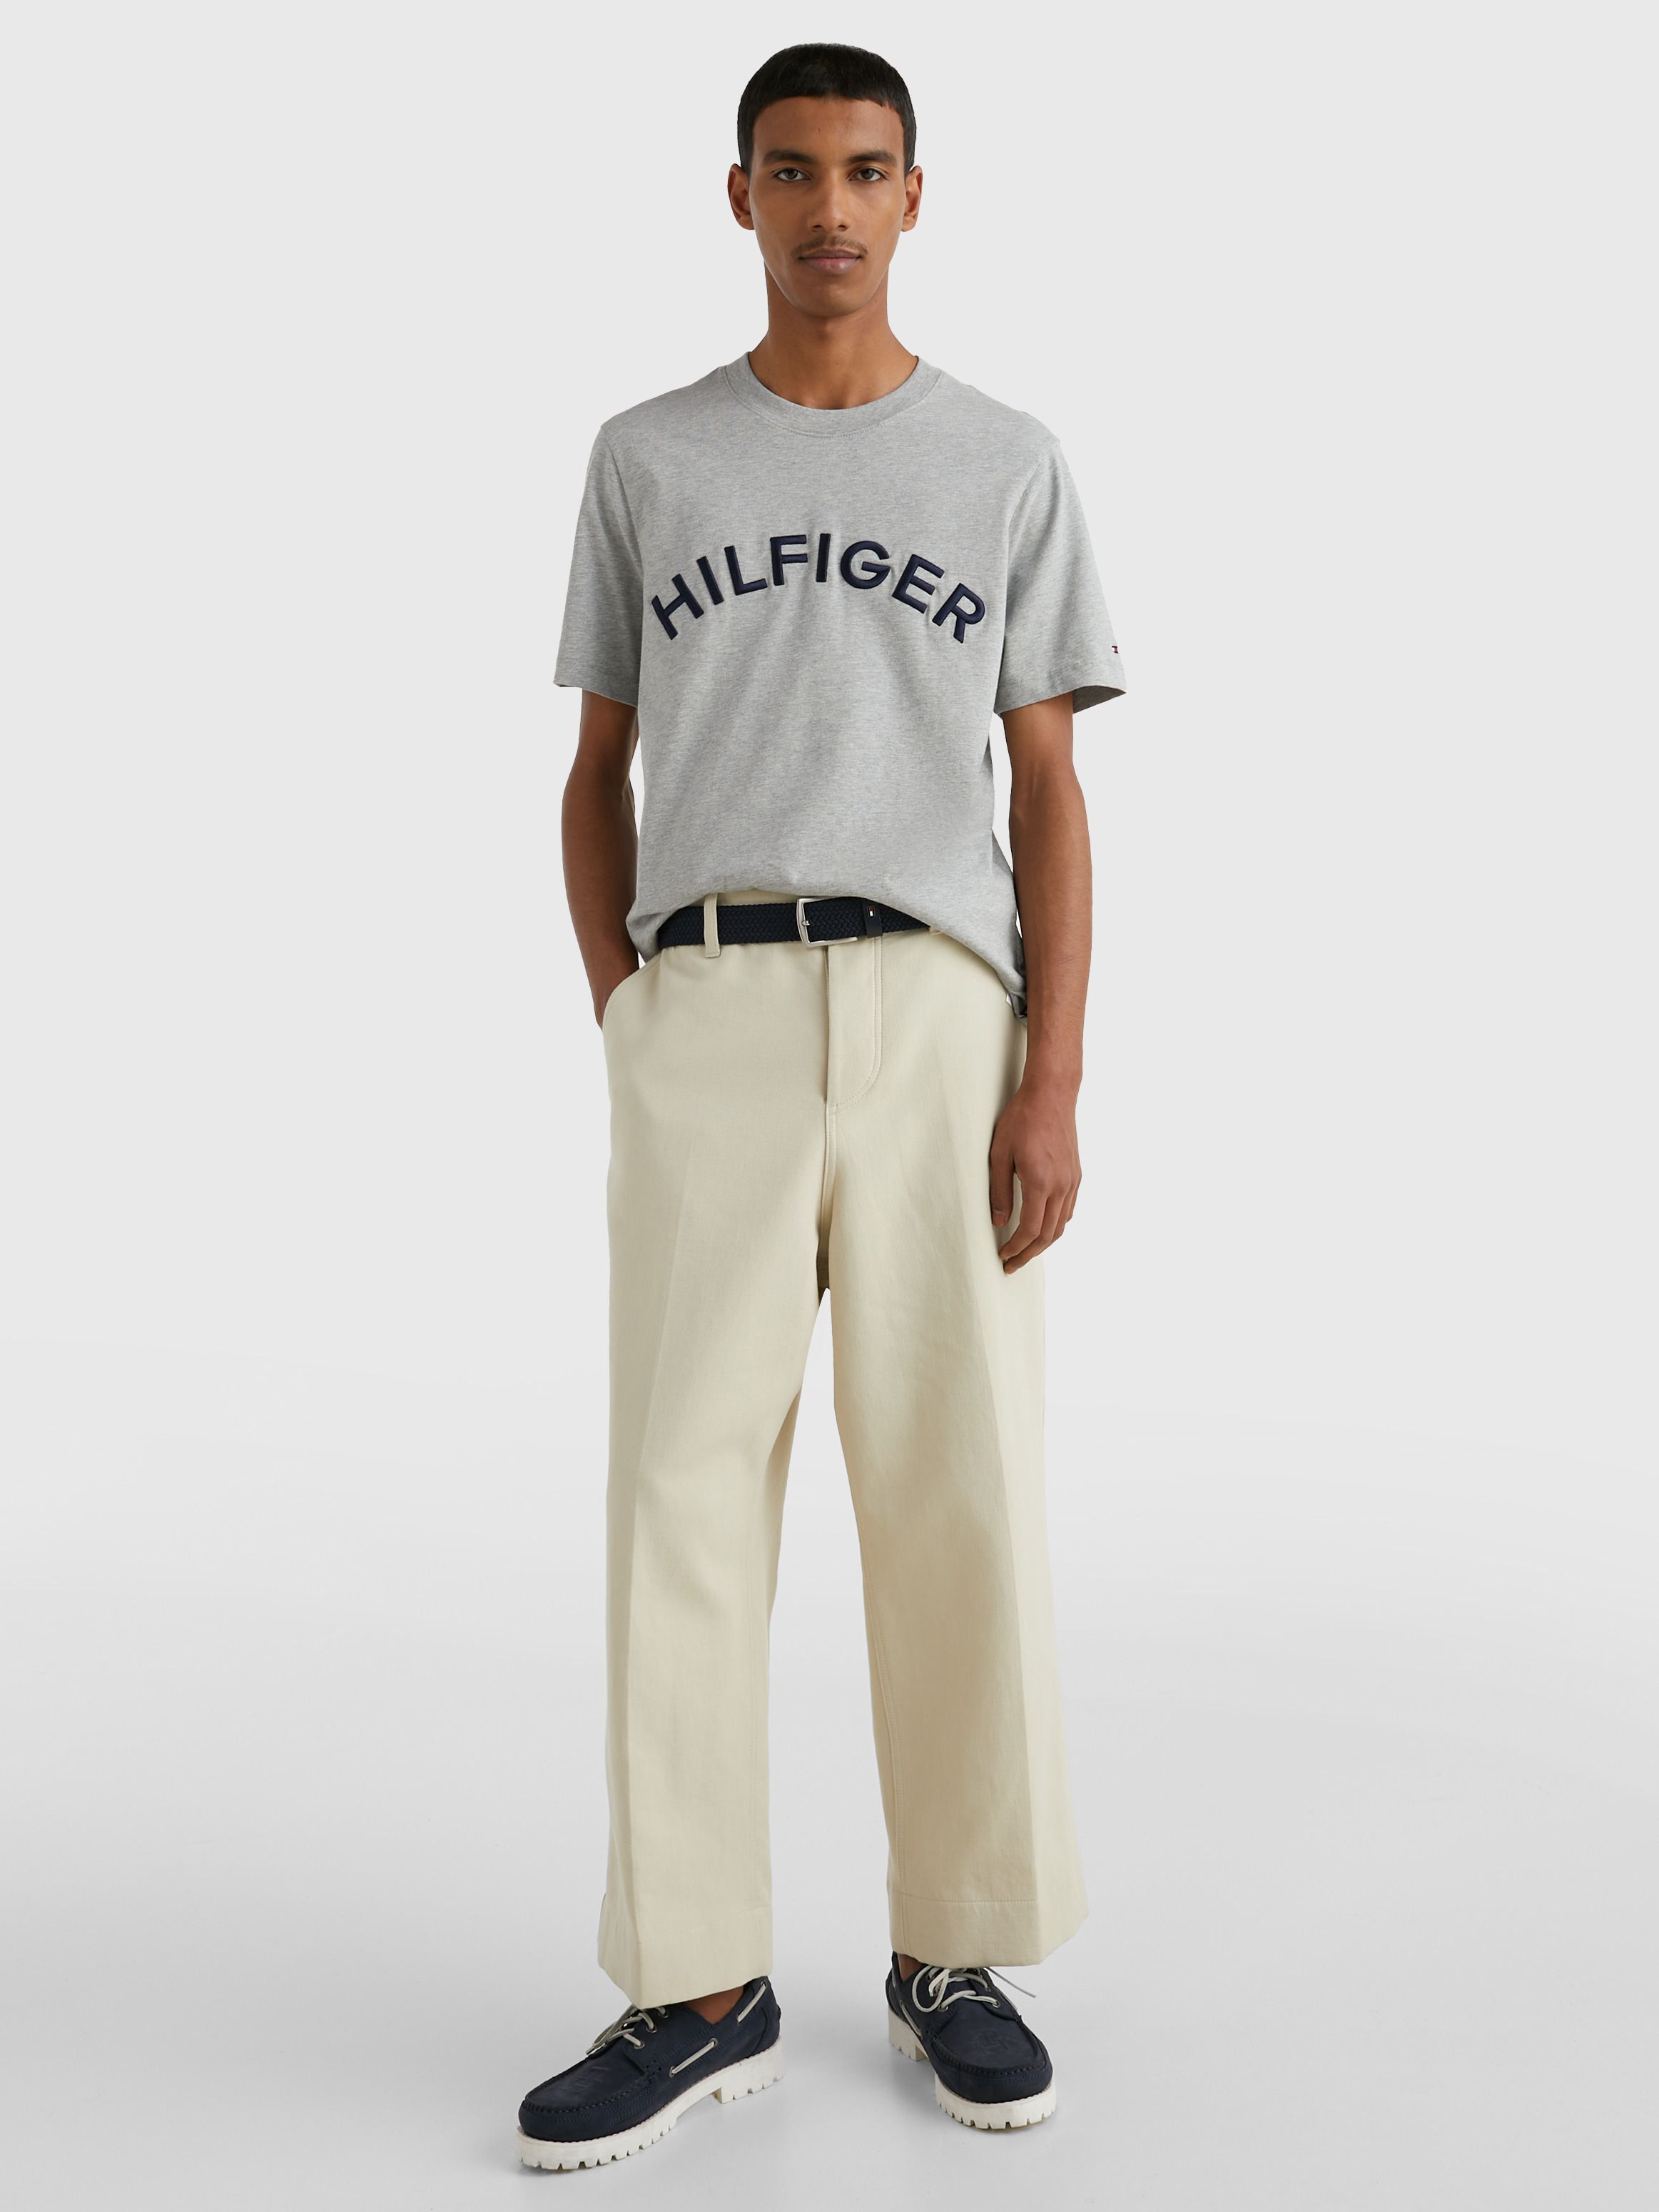 Logo Embroidery T-Shirt | Tommy Hilfiger